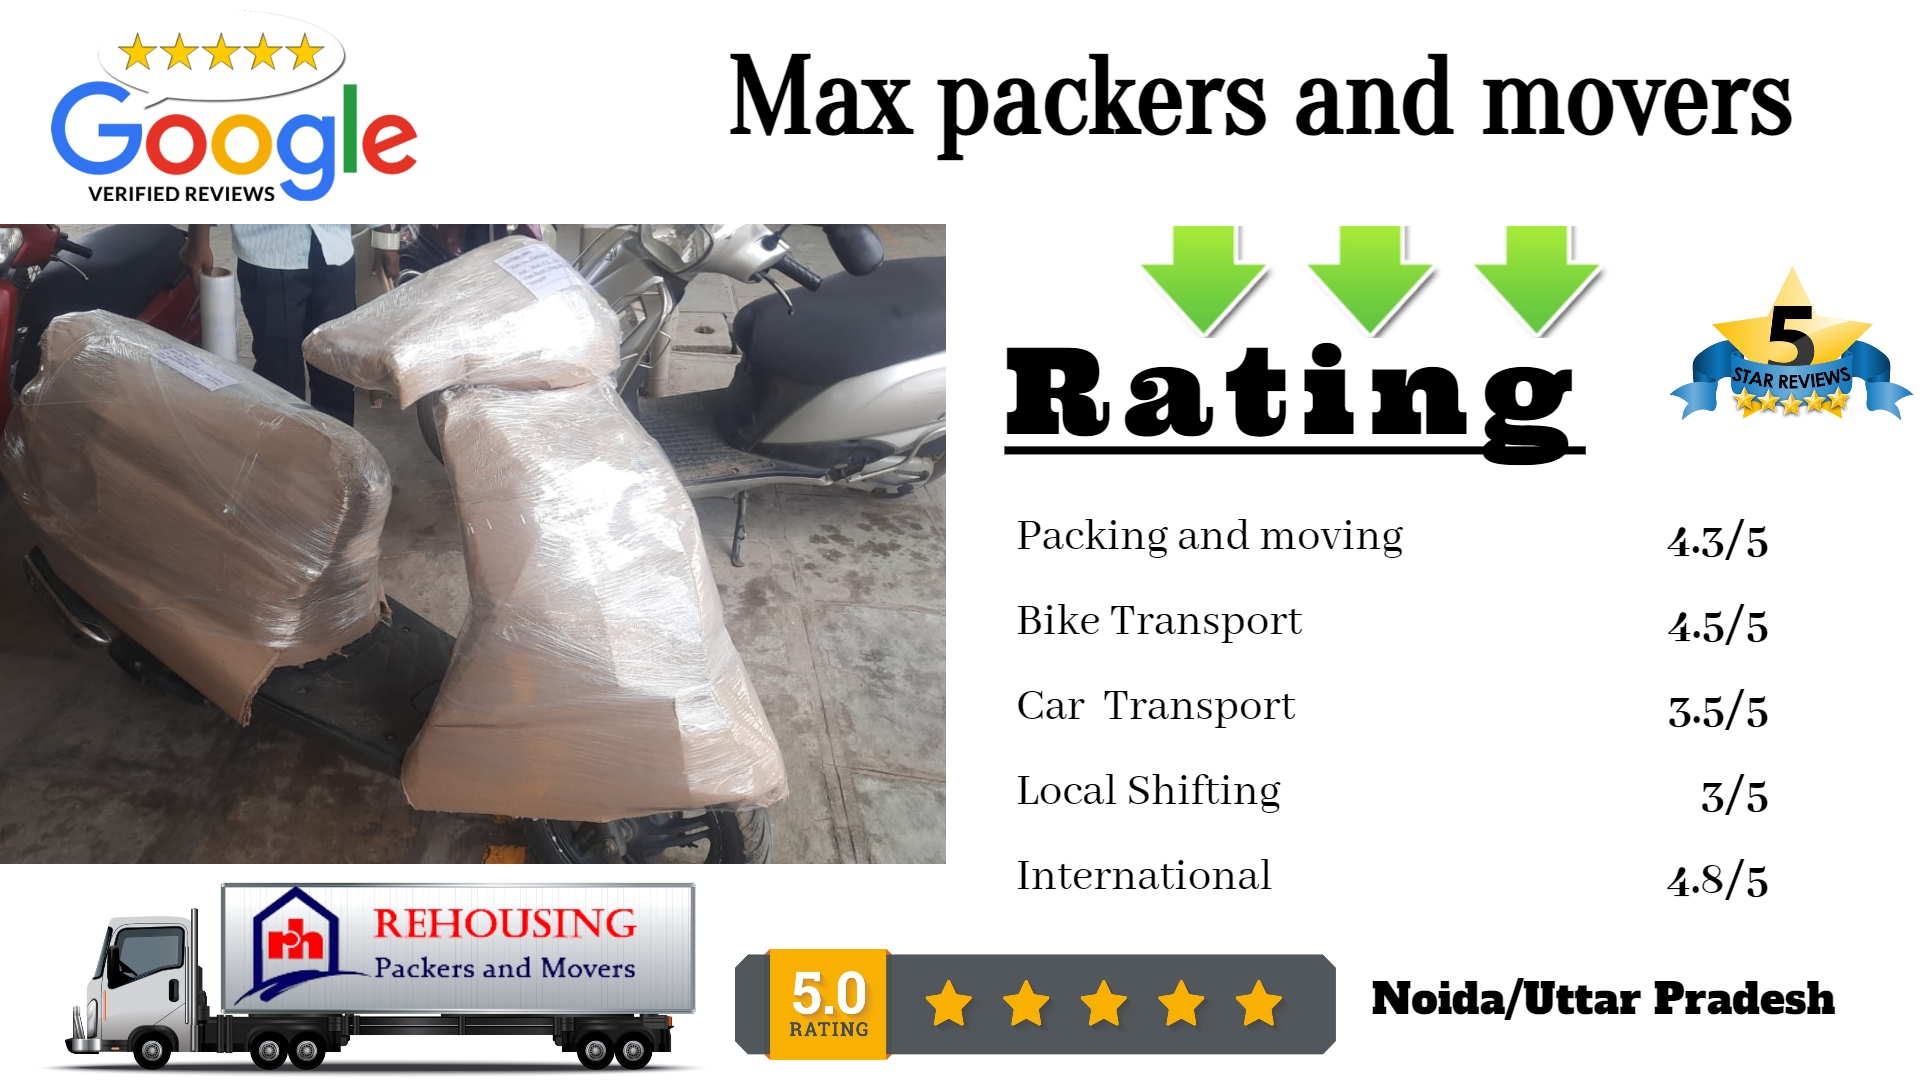 Max packers and movers | Reviews Contact Details About